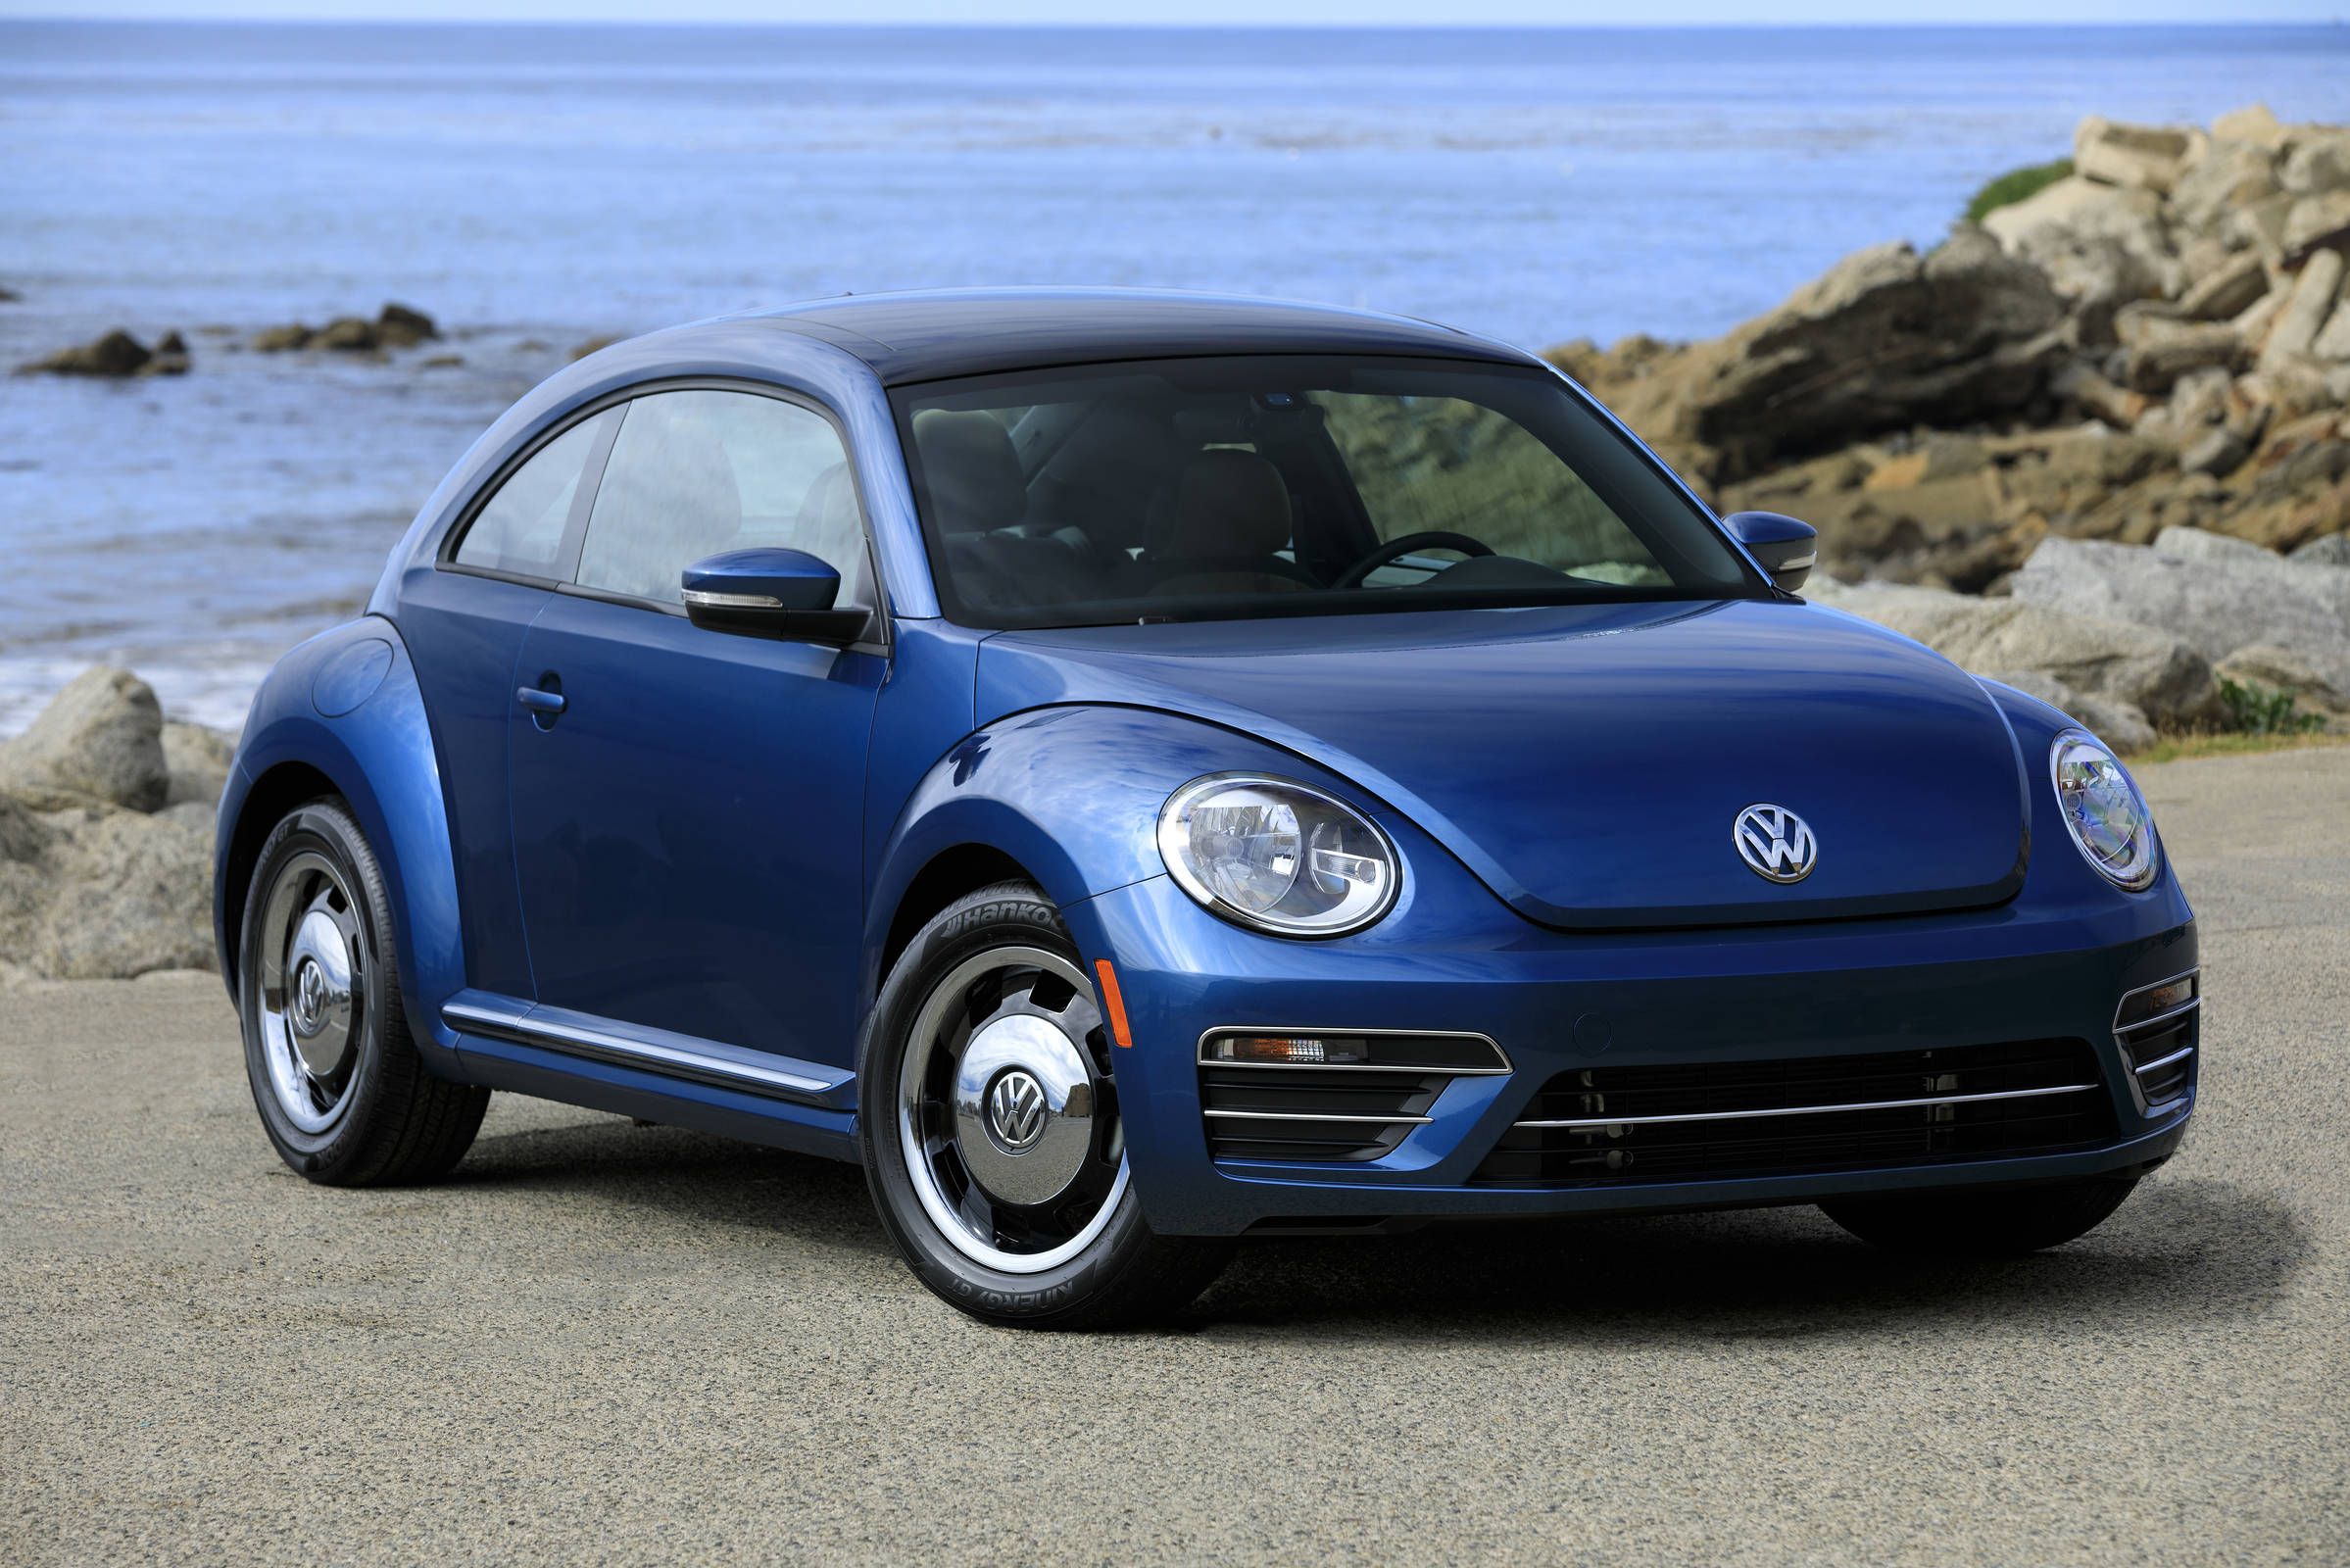 2018 Volkswagen Beetle Coast essentials: More style than the average Bug